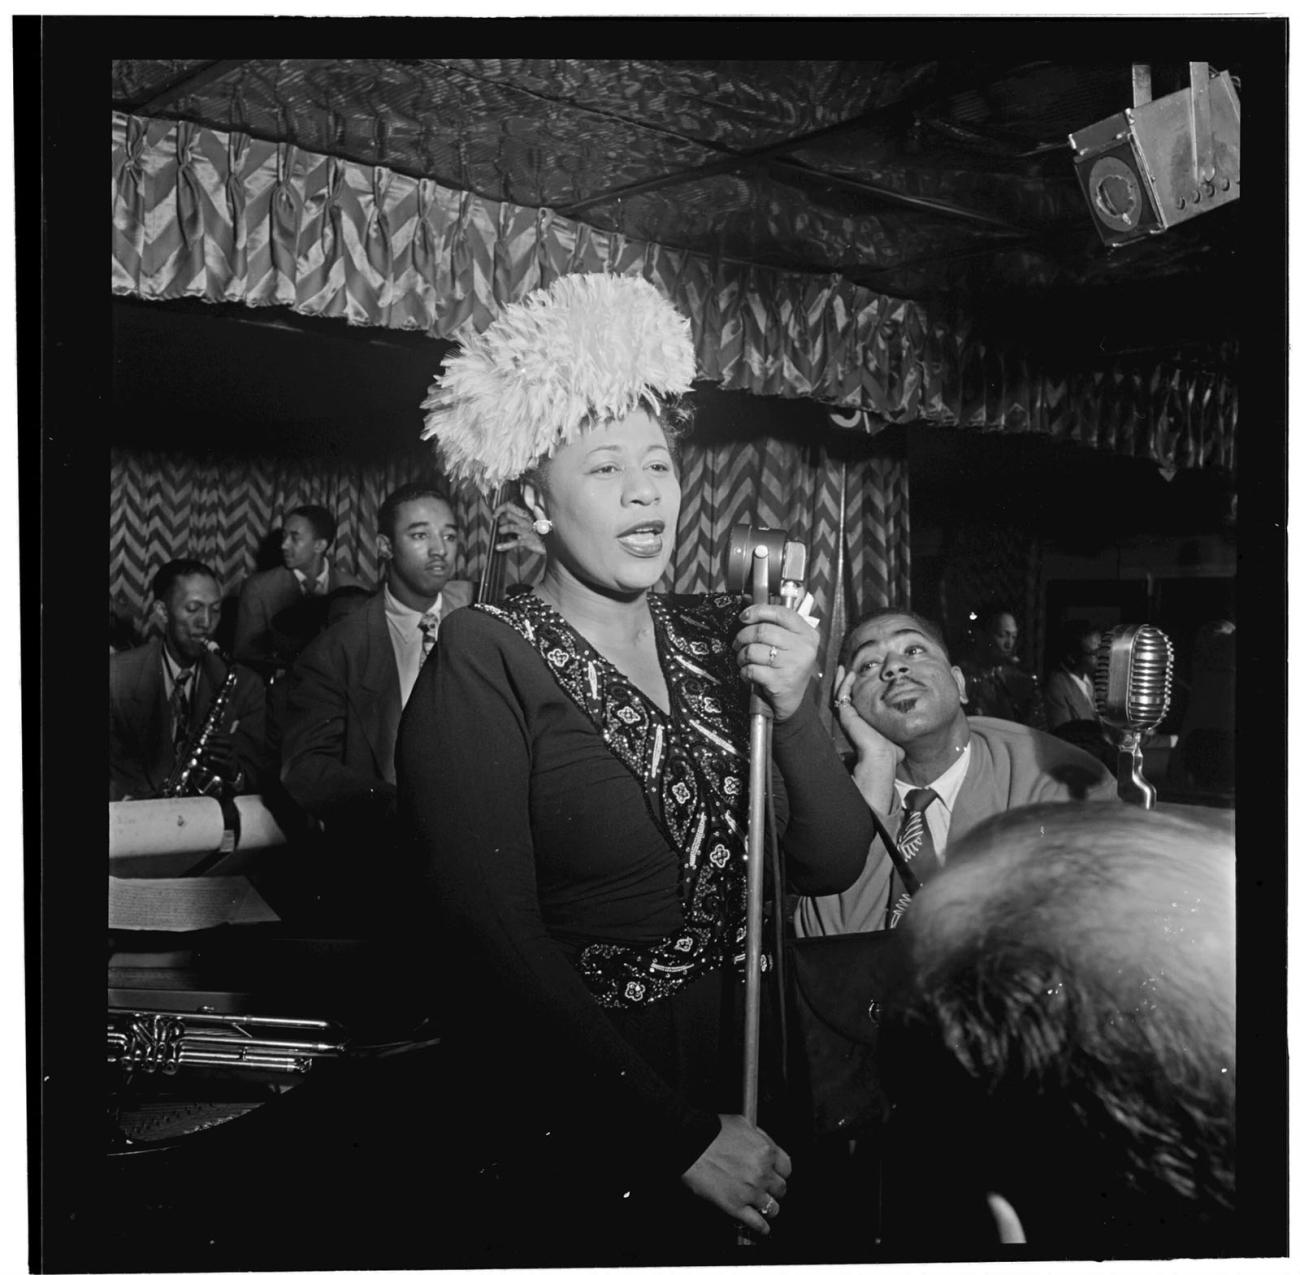 Ella Fiztgerald sings into a microphone in a black and white historical photo